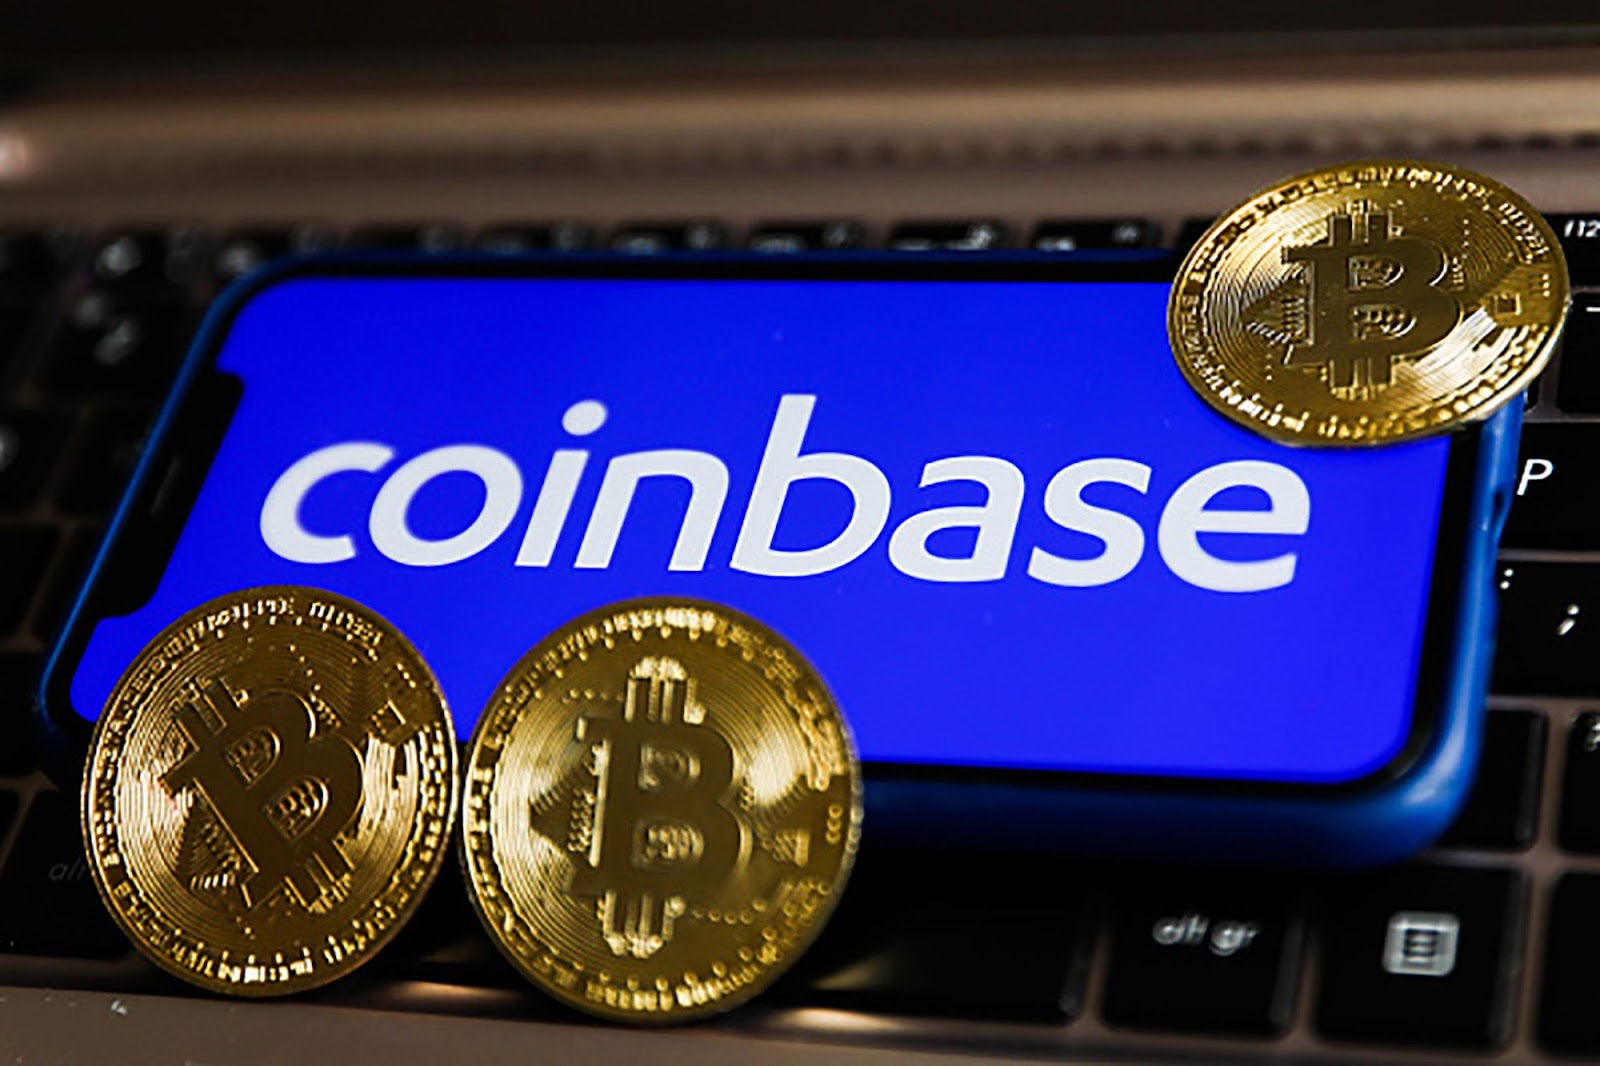 when i buy crypto on coinbase where does it go